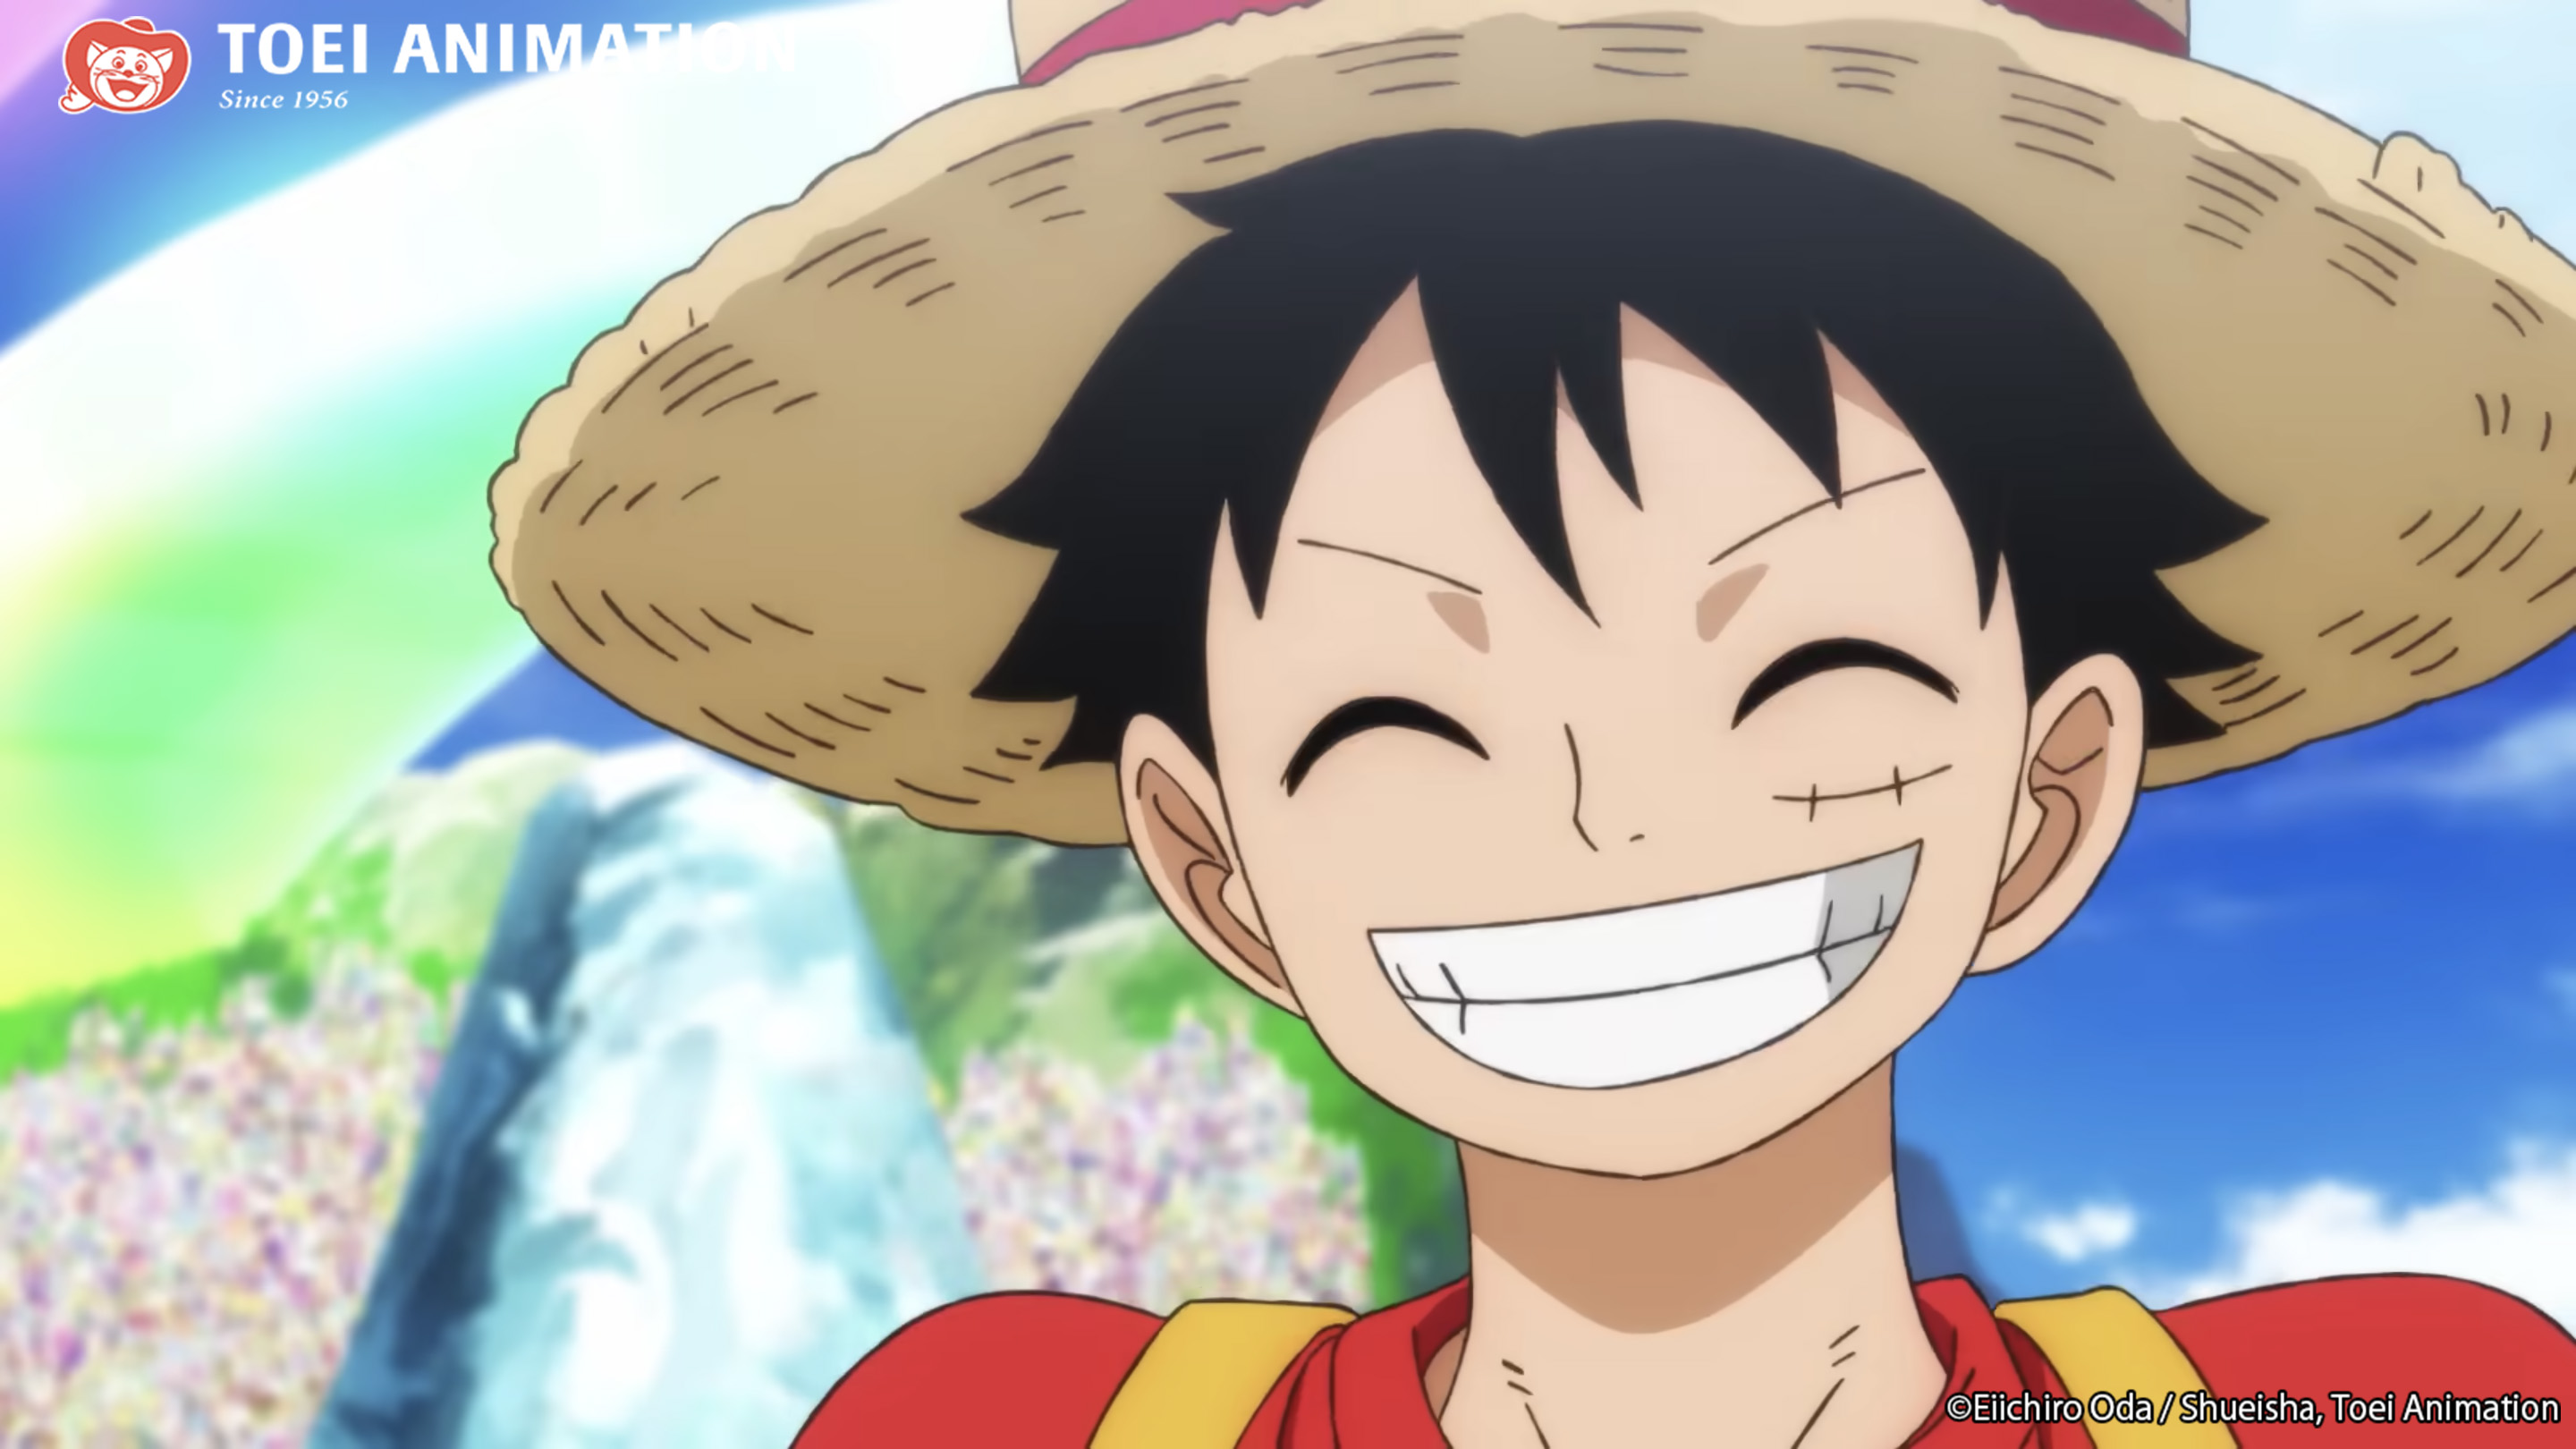 Crunchyroll - One Piece Film: Red Becomes 2nd Highest-Grossing Anime Film  in Franchise With  Billion Yen Made in 9 Days